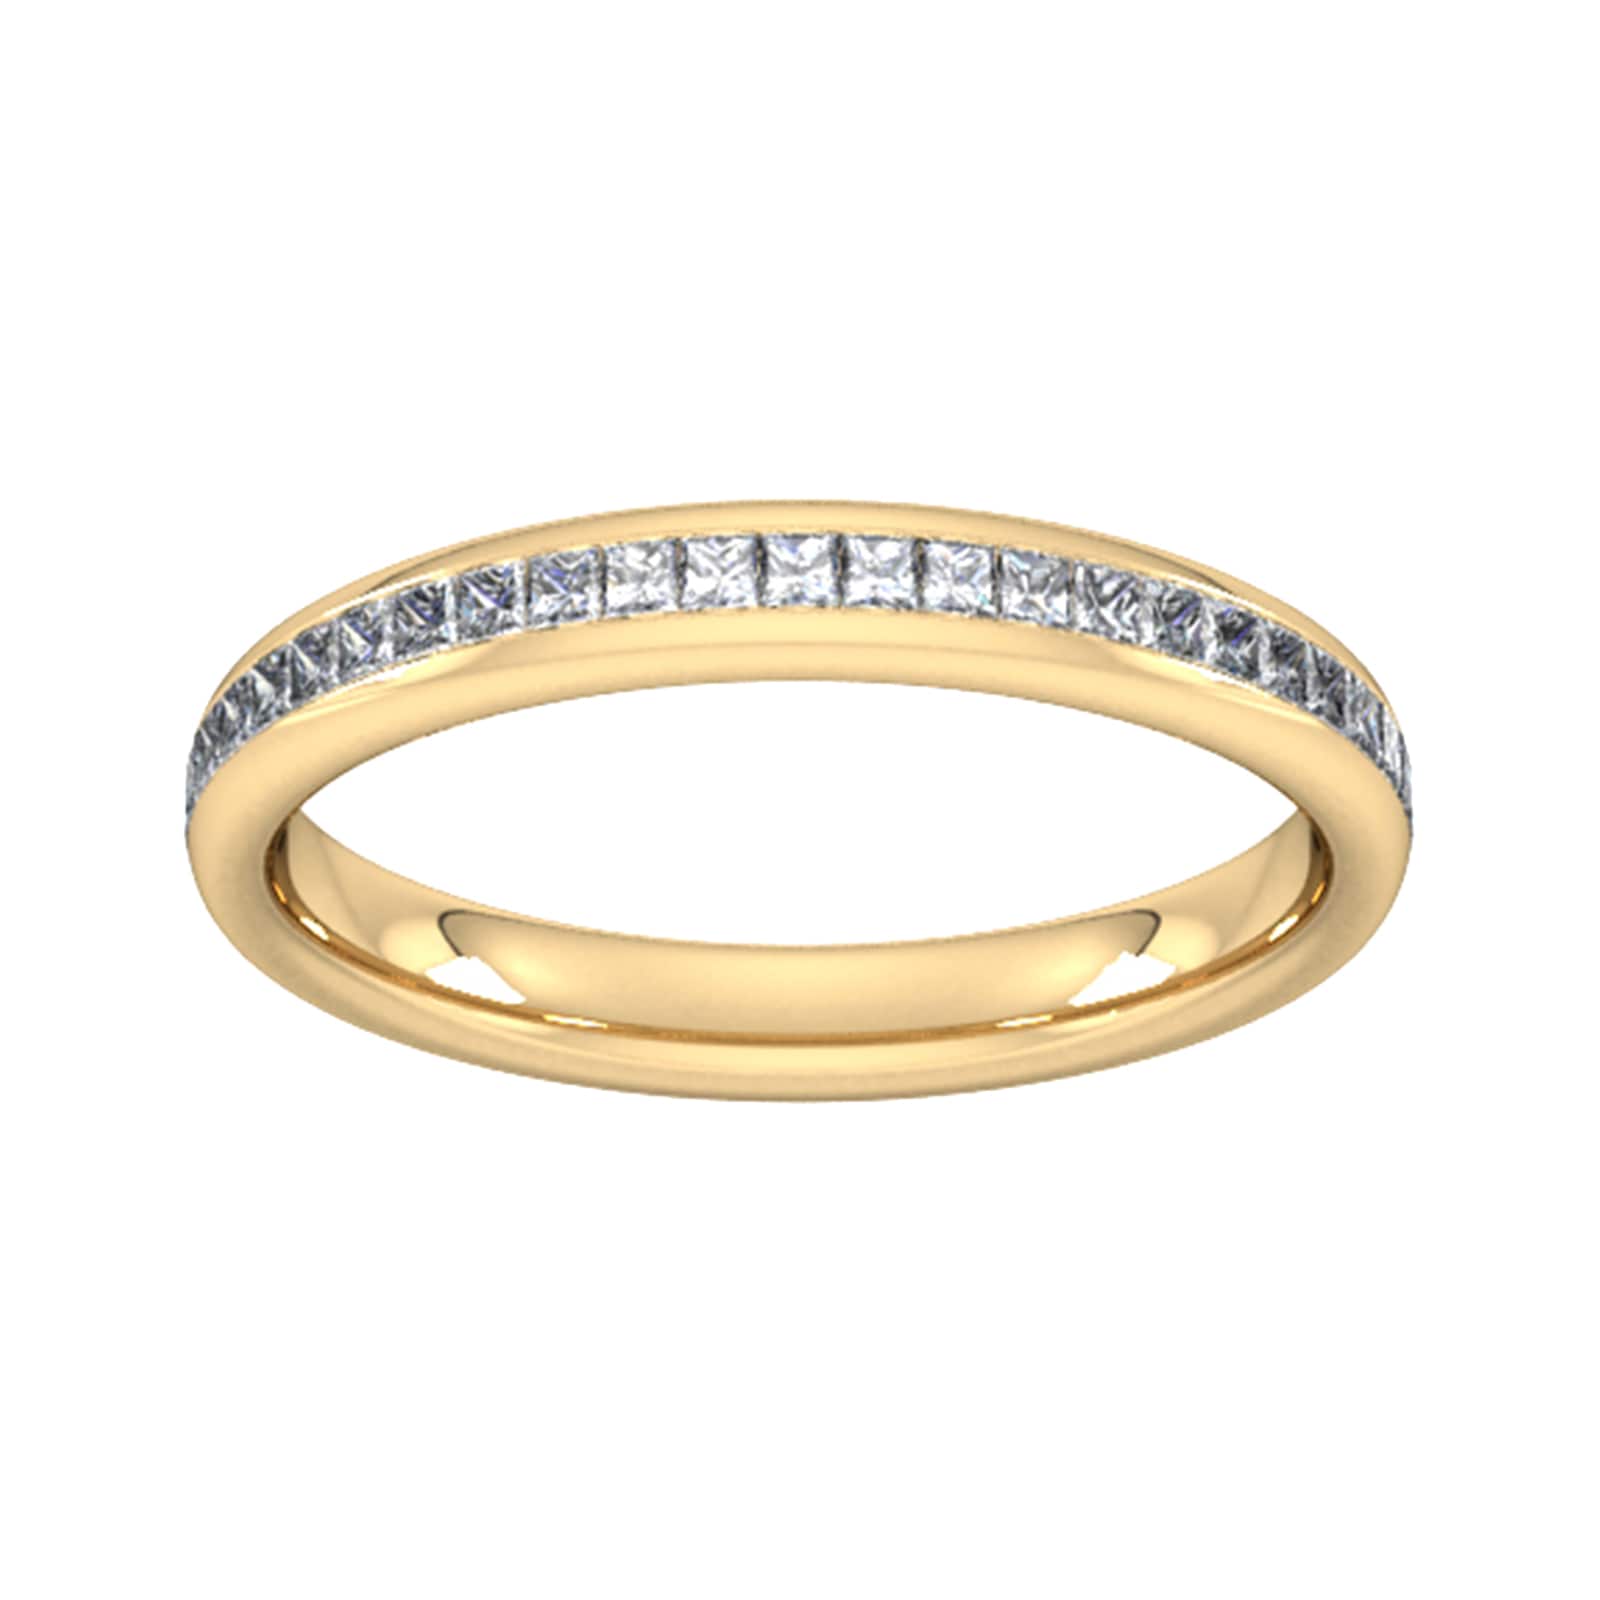 0.34 Carat Total Weight Princess Cut Channel Set Wedding Ring In 18 Carat Yellow Gold - Ring Size R